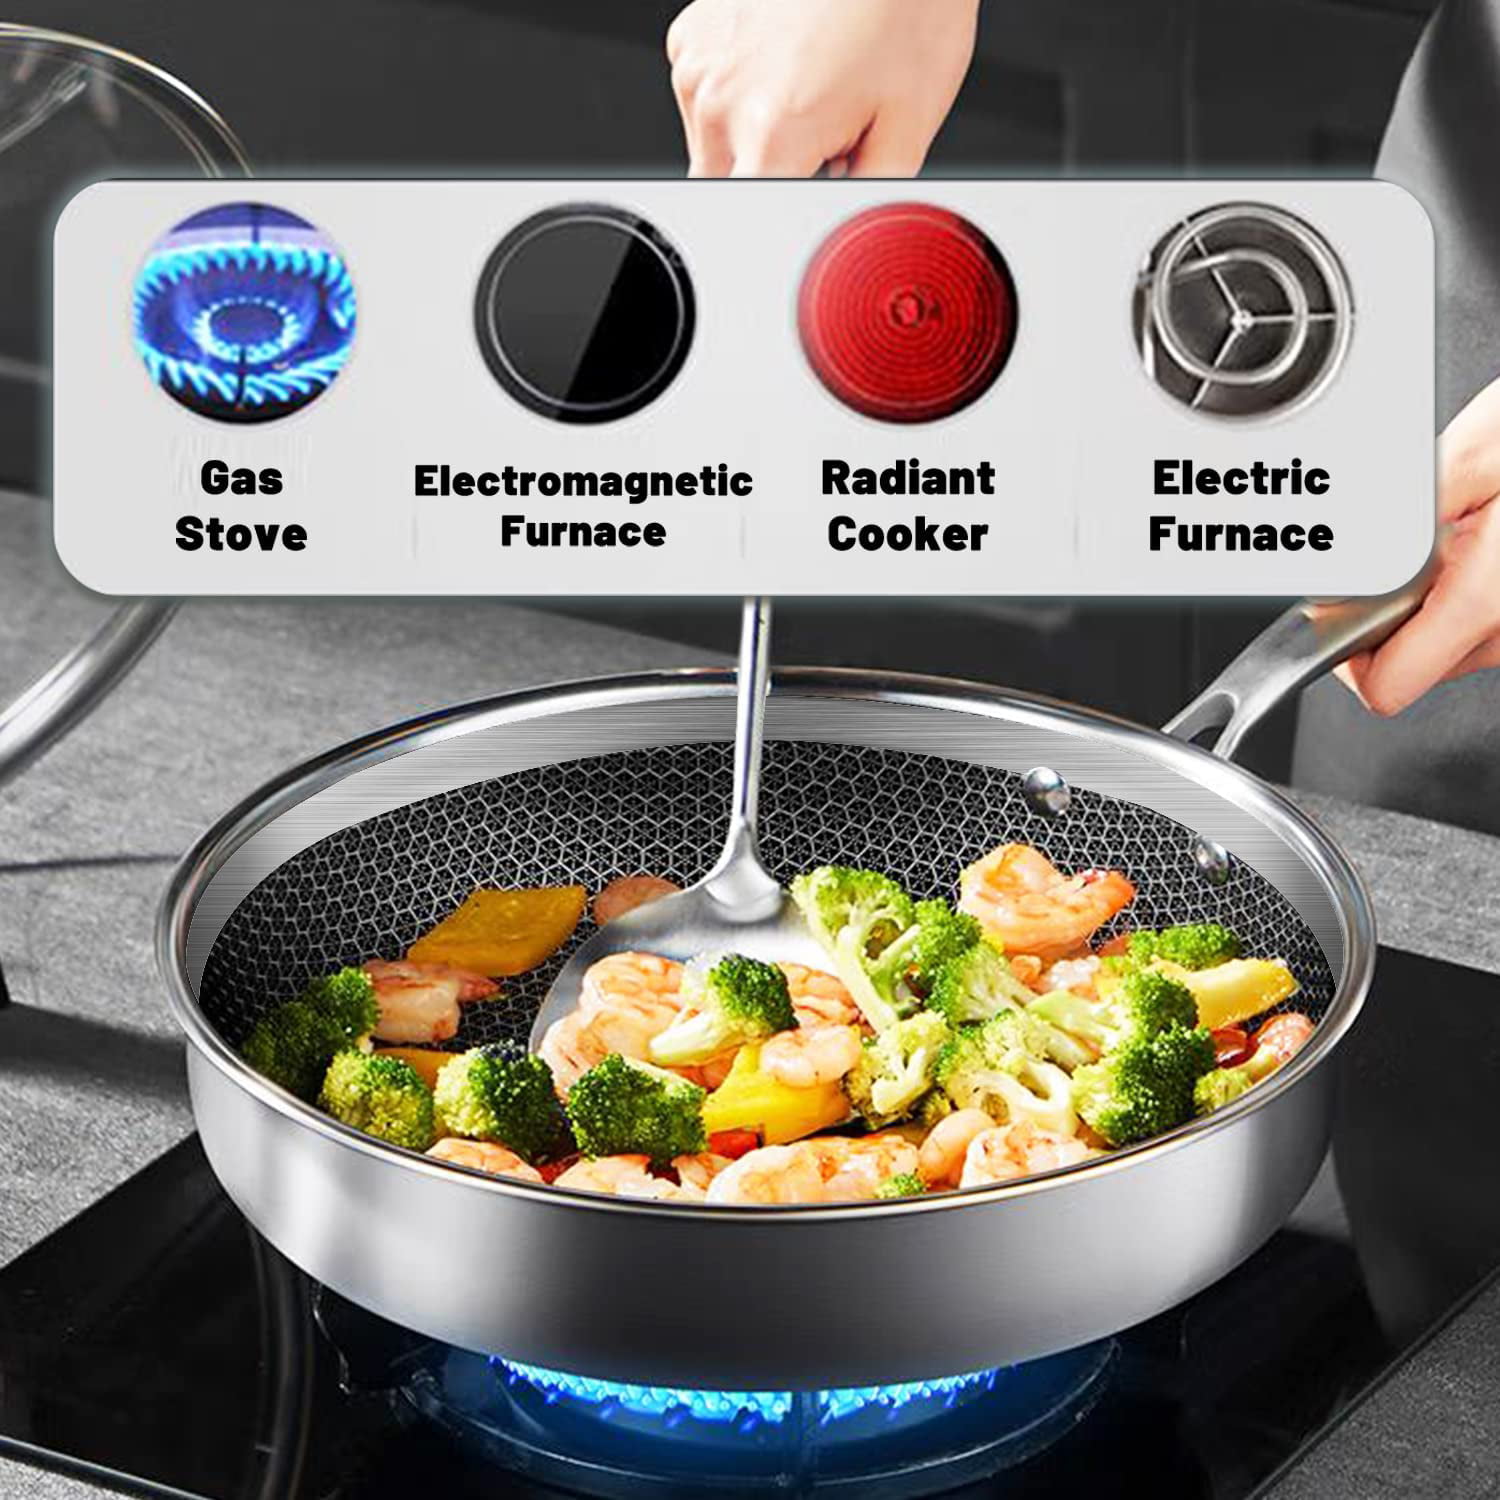 HexClad 14 Inch Hybrid Stainless Steel Frying Pan with Lid, Stay Cool  Handles, Dishwasher and Oven Safe, Non-Stick, Works with Induction Cooktop,  Gas, Ceramic, and Electric Stove